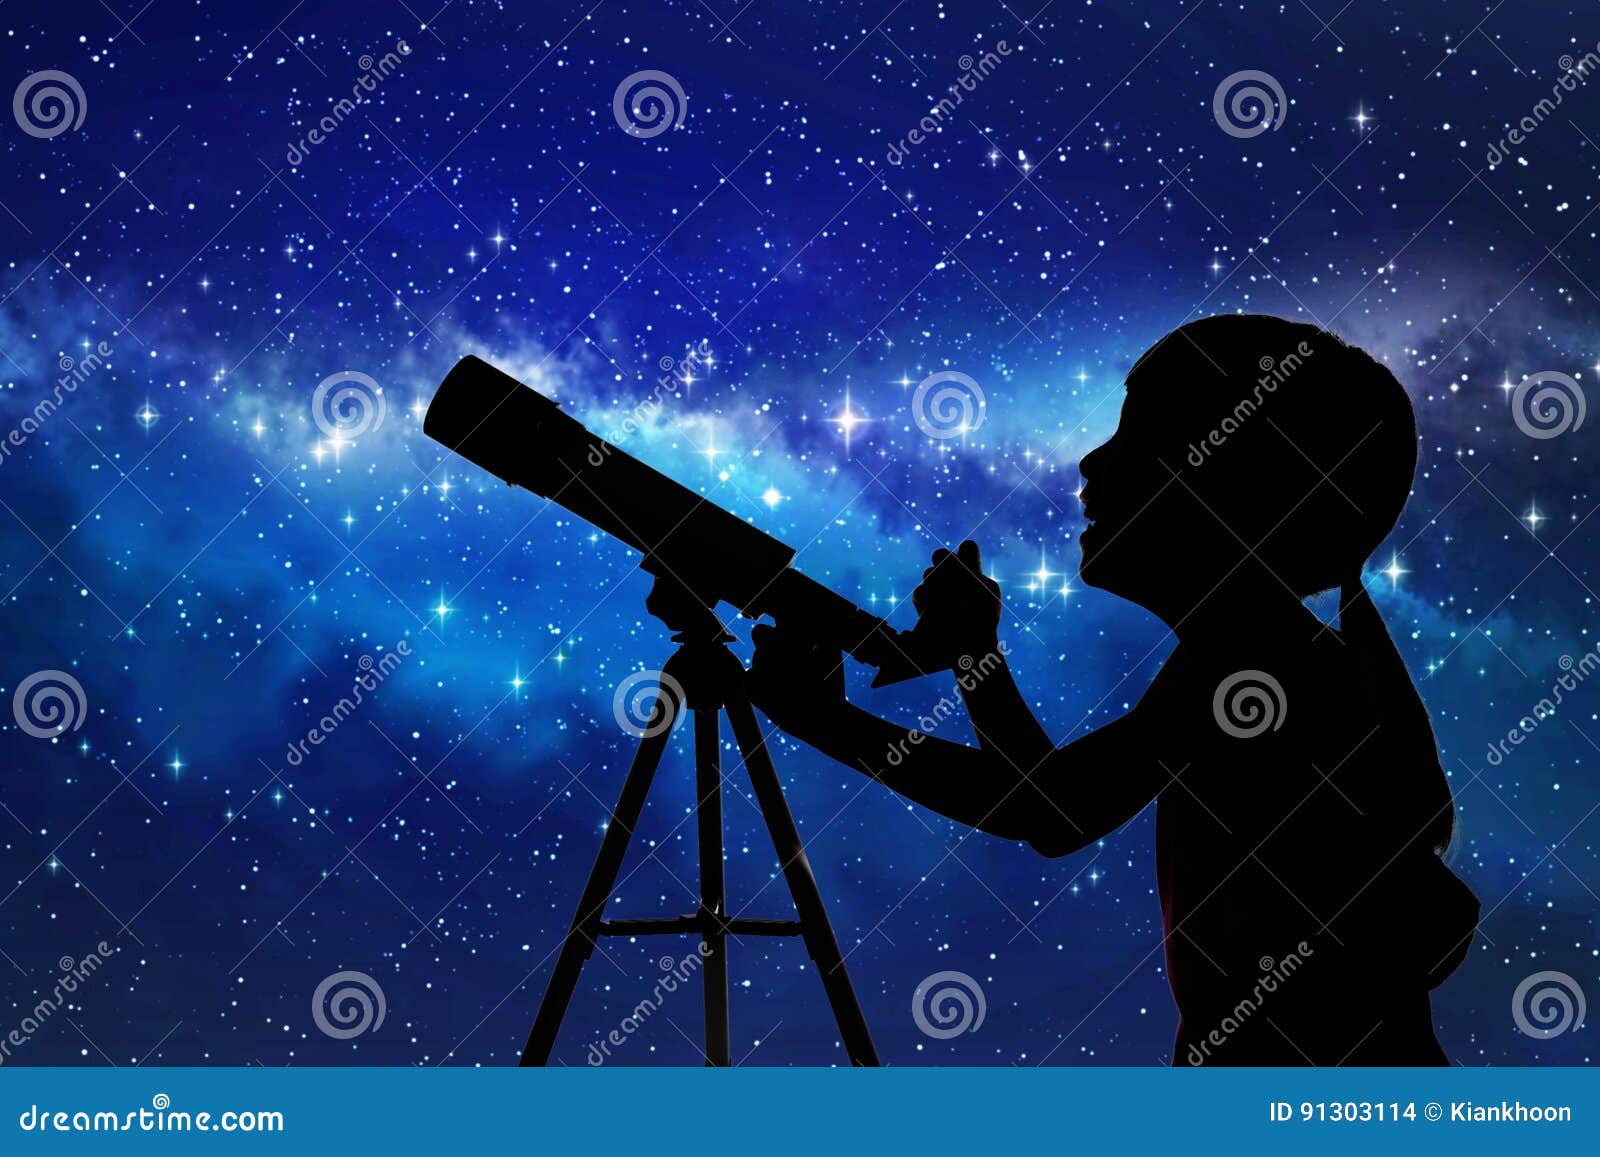 silhouette of little girl looking through a telescope